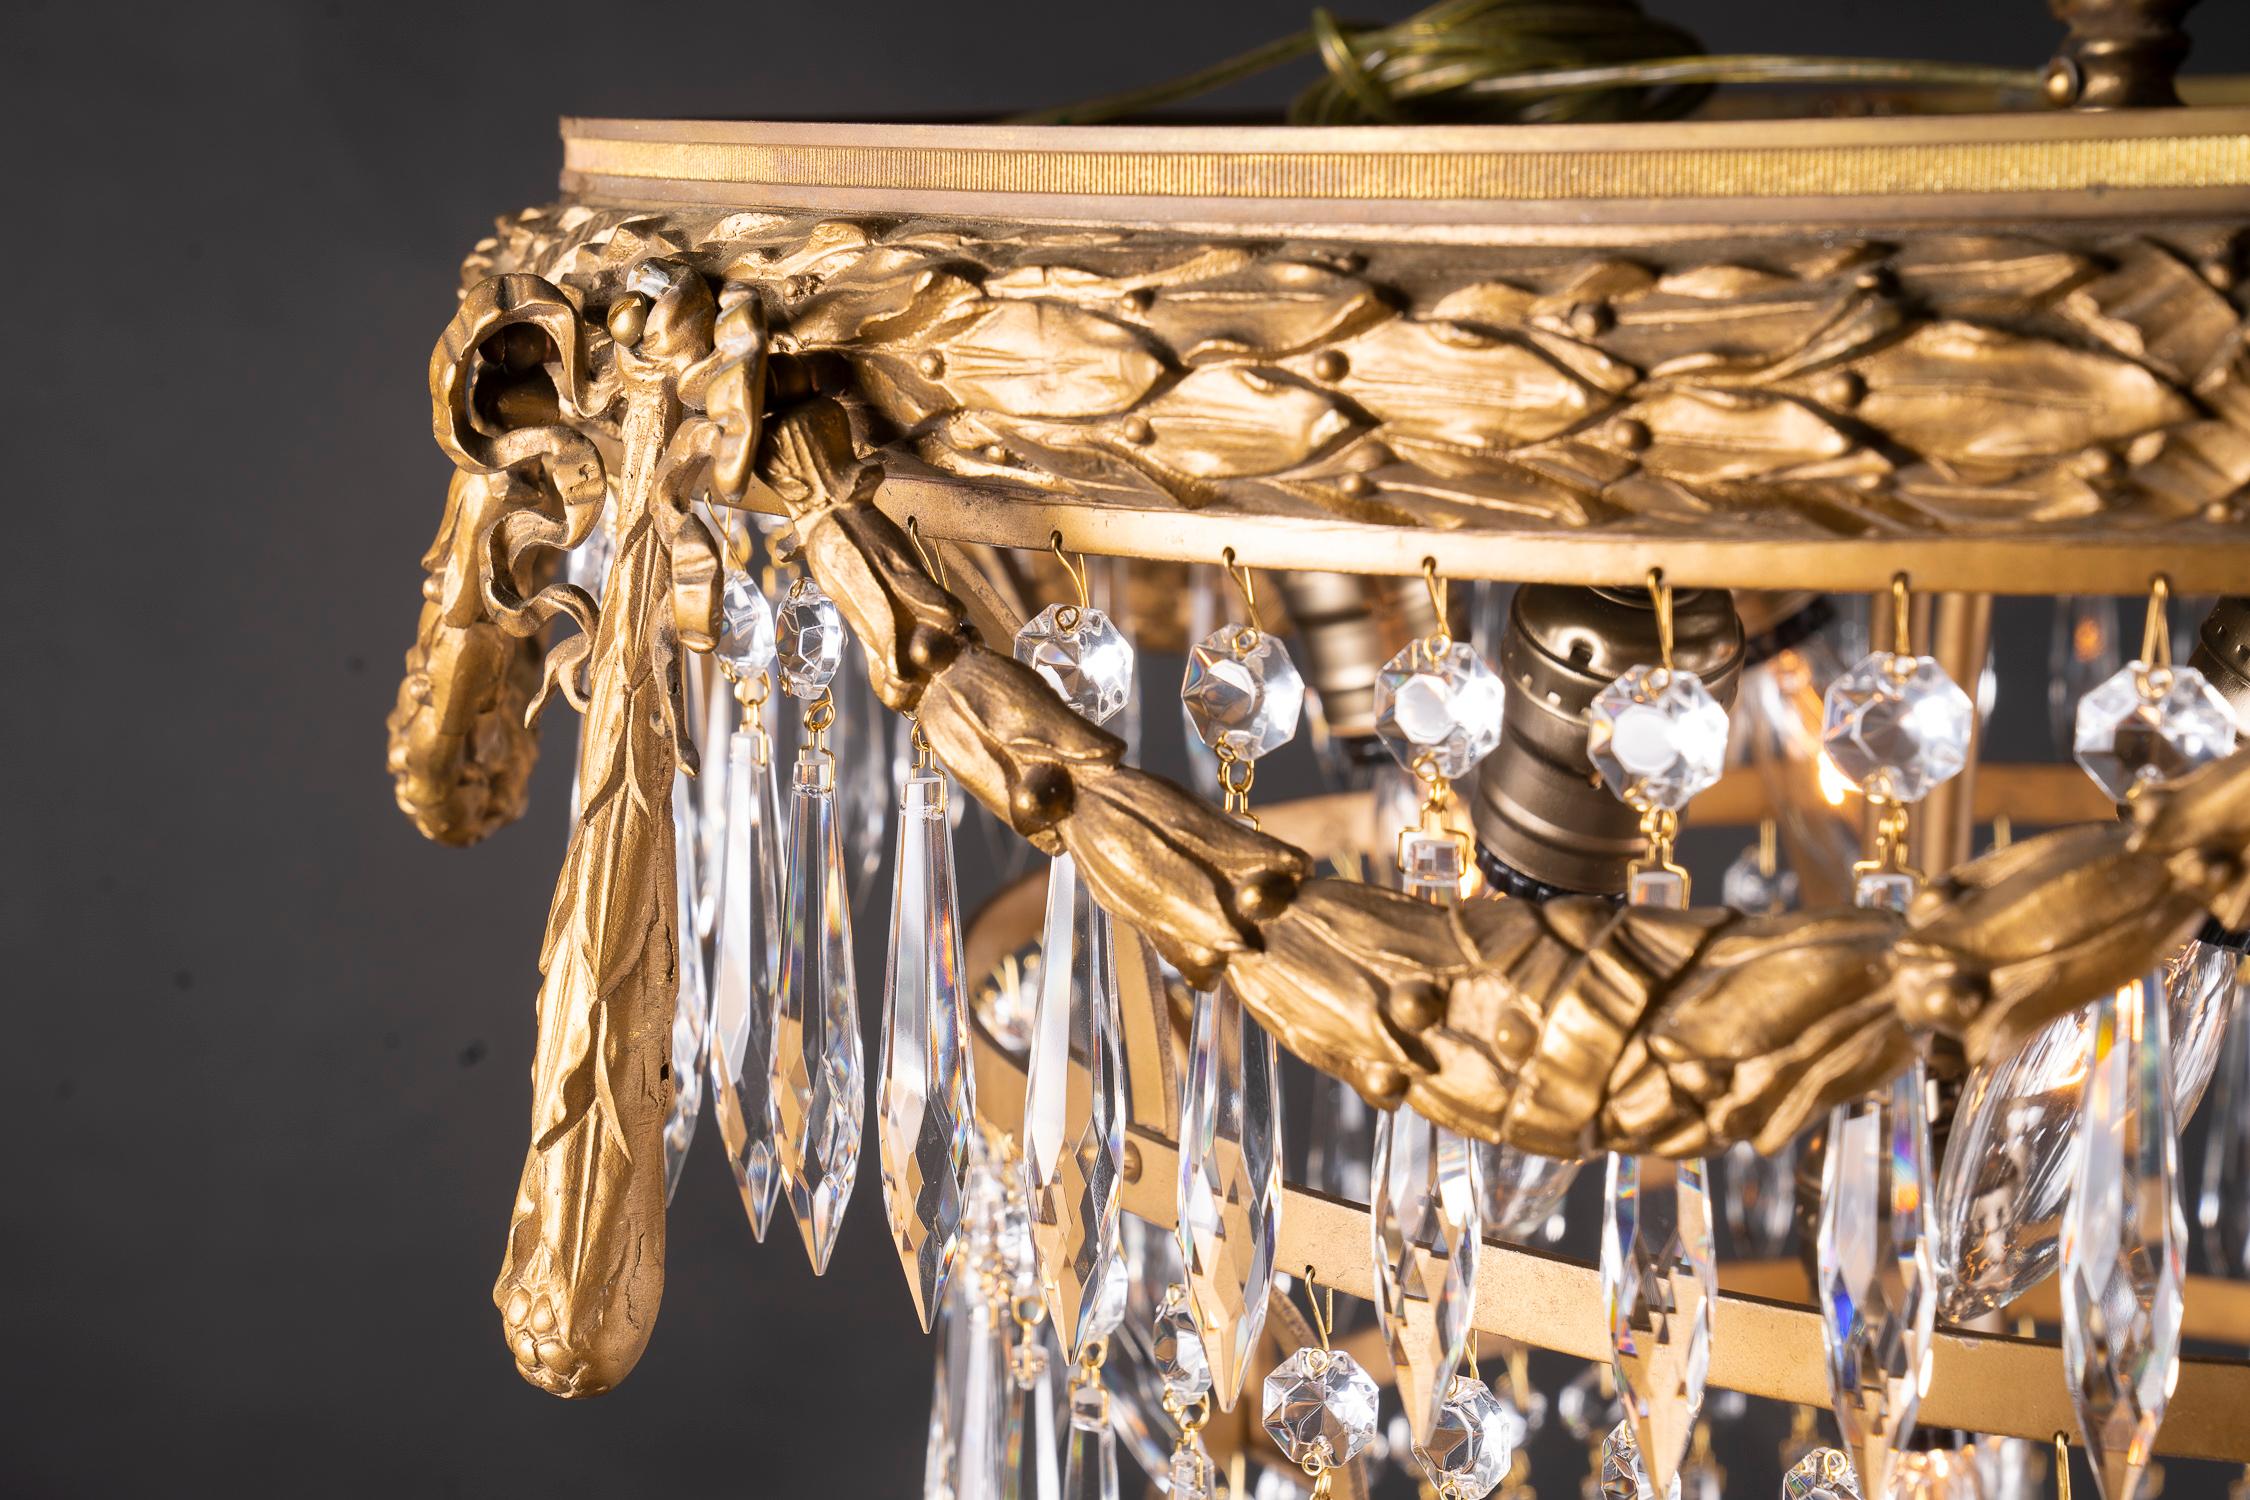 Beautiful French 19th century Louis XVI chandelier with bronze top ring and adorned with finely cast garlands and ribbons, draped with tear-dropped prisms, and nine interior lights. Circa 1890

Each piece in our shop is professionally rewired and in